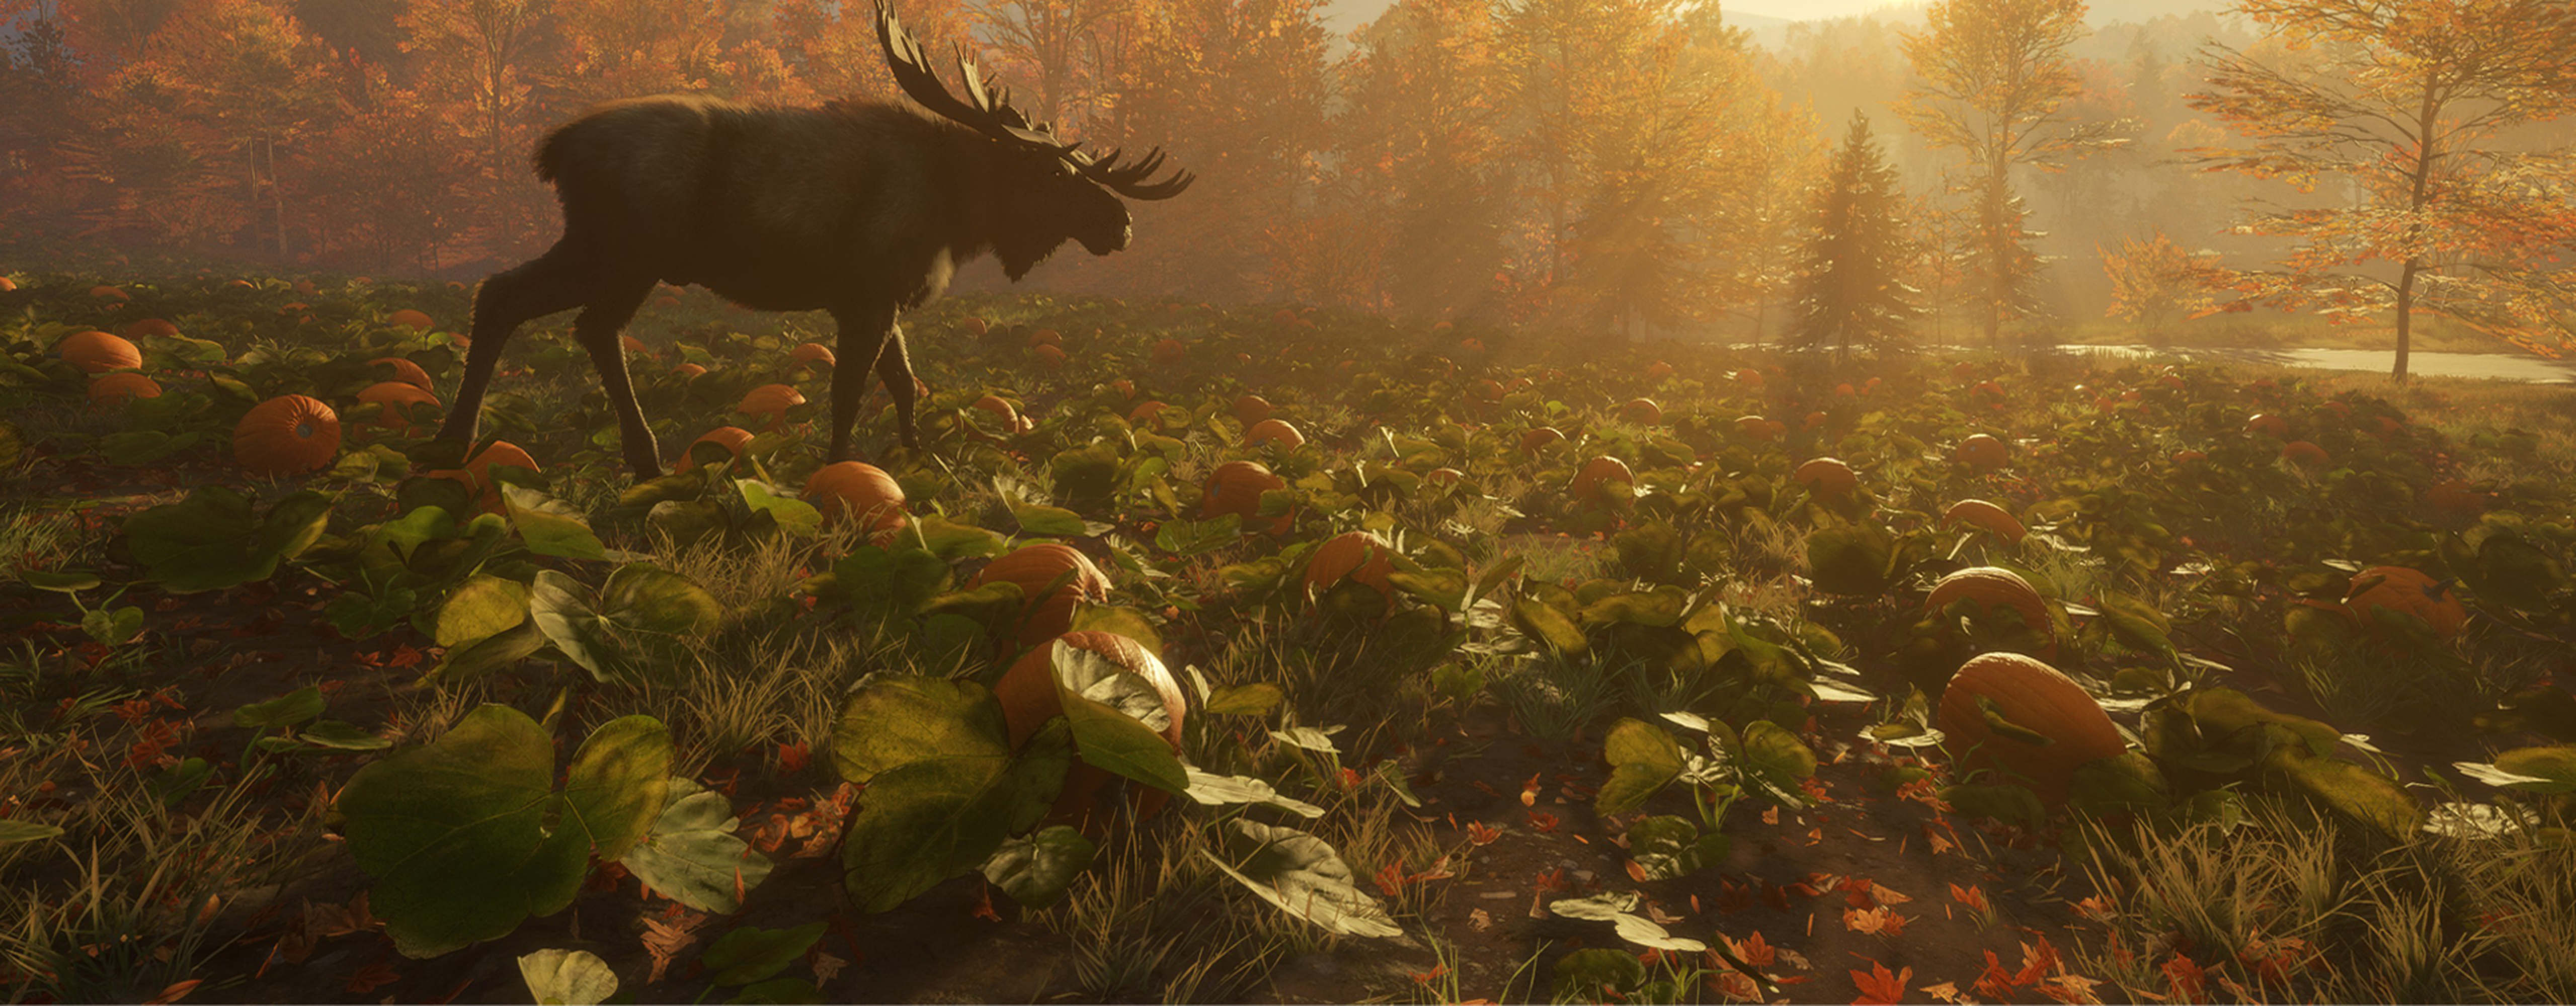 Great One Moose walking through a pumpkin field in New England Mountains reserve.